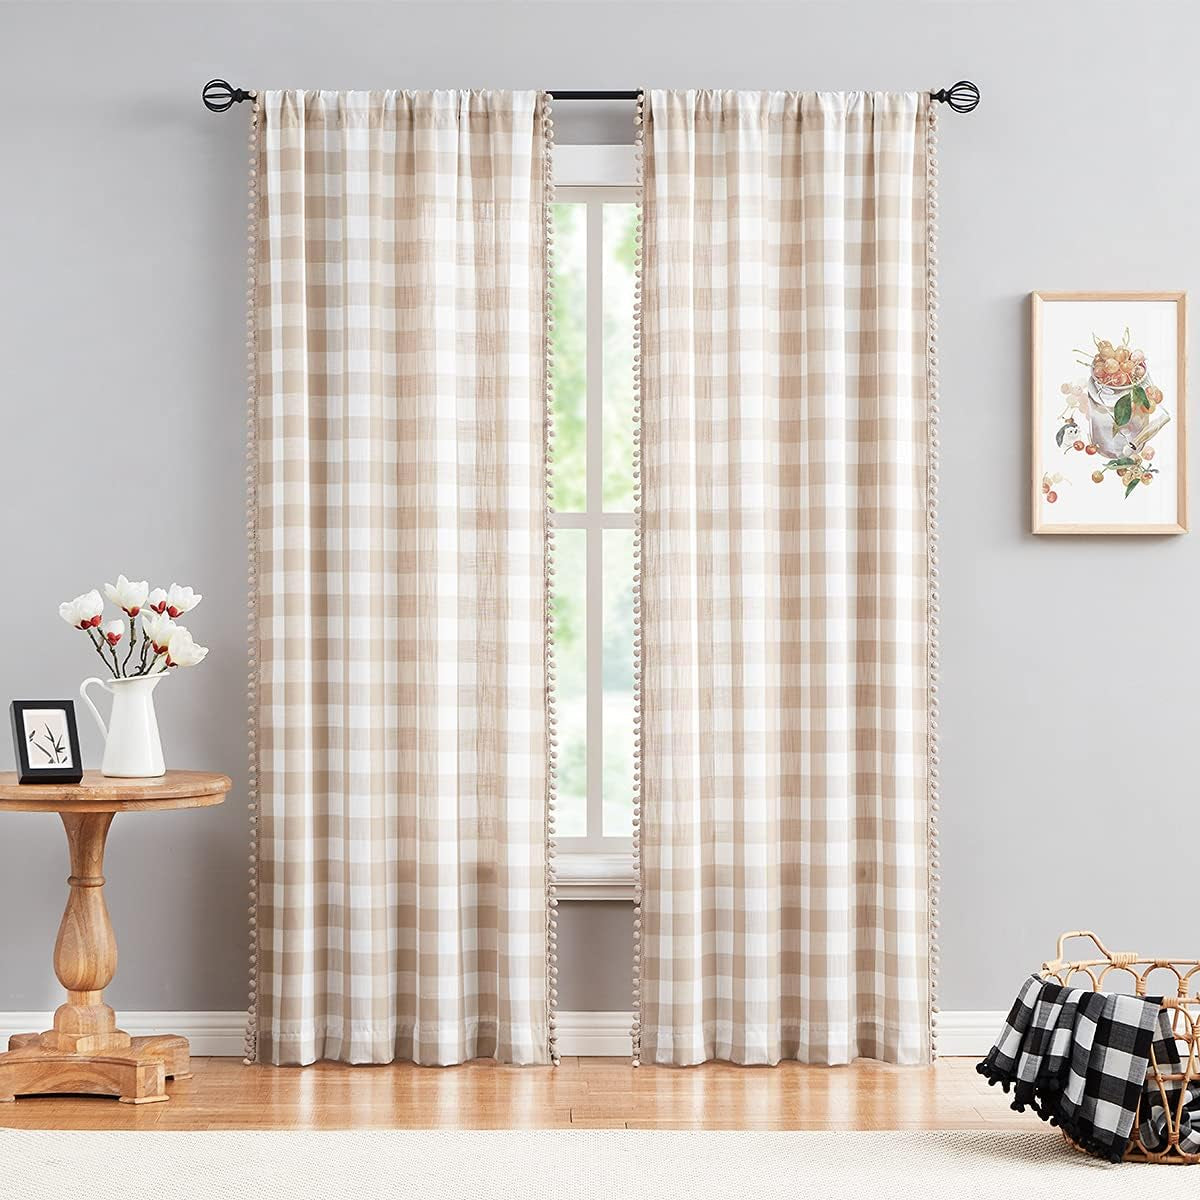 Treatmentex Buffalo Check Curtains 84Inch Farmhouse Pom Pom Drapes for Living Room Vintage Gingham Plaid Semi Sheer Tan Window Curtains for Bedroom Kitchen 2 Panels Rod Pocket Taupe and White  Natural Decoratex   